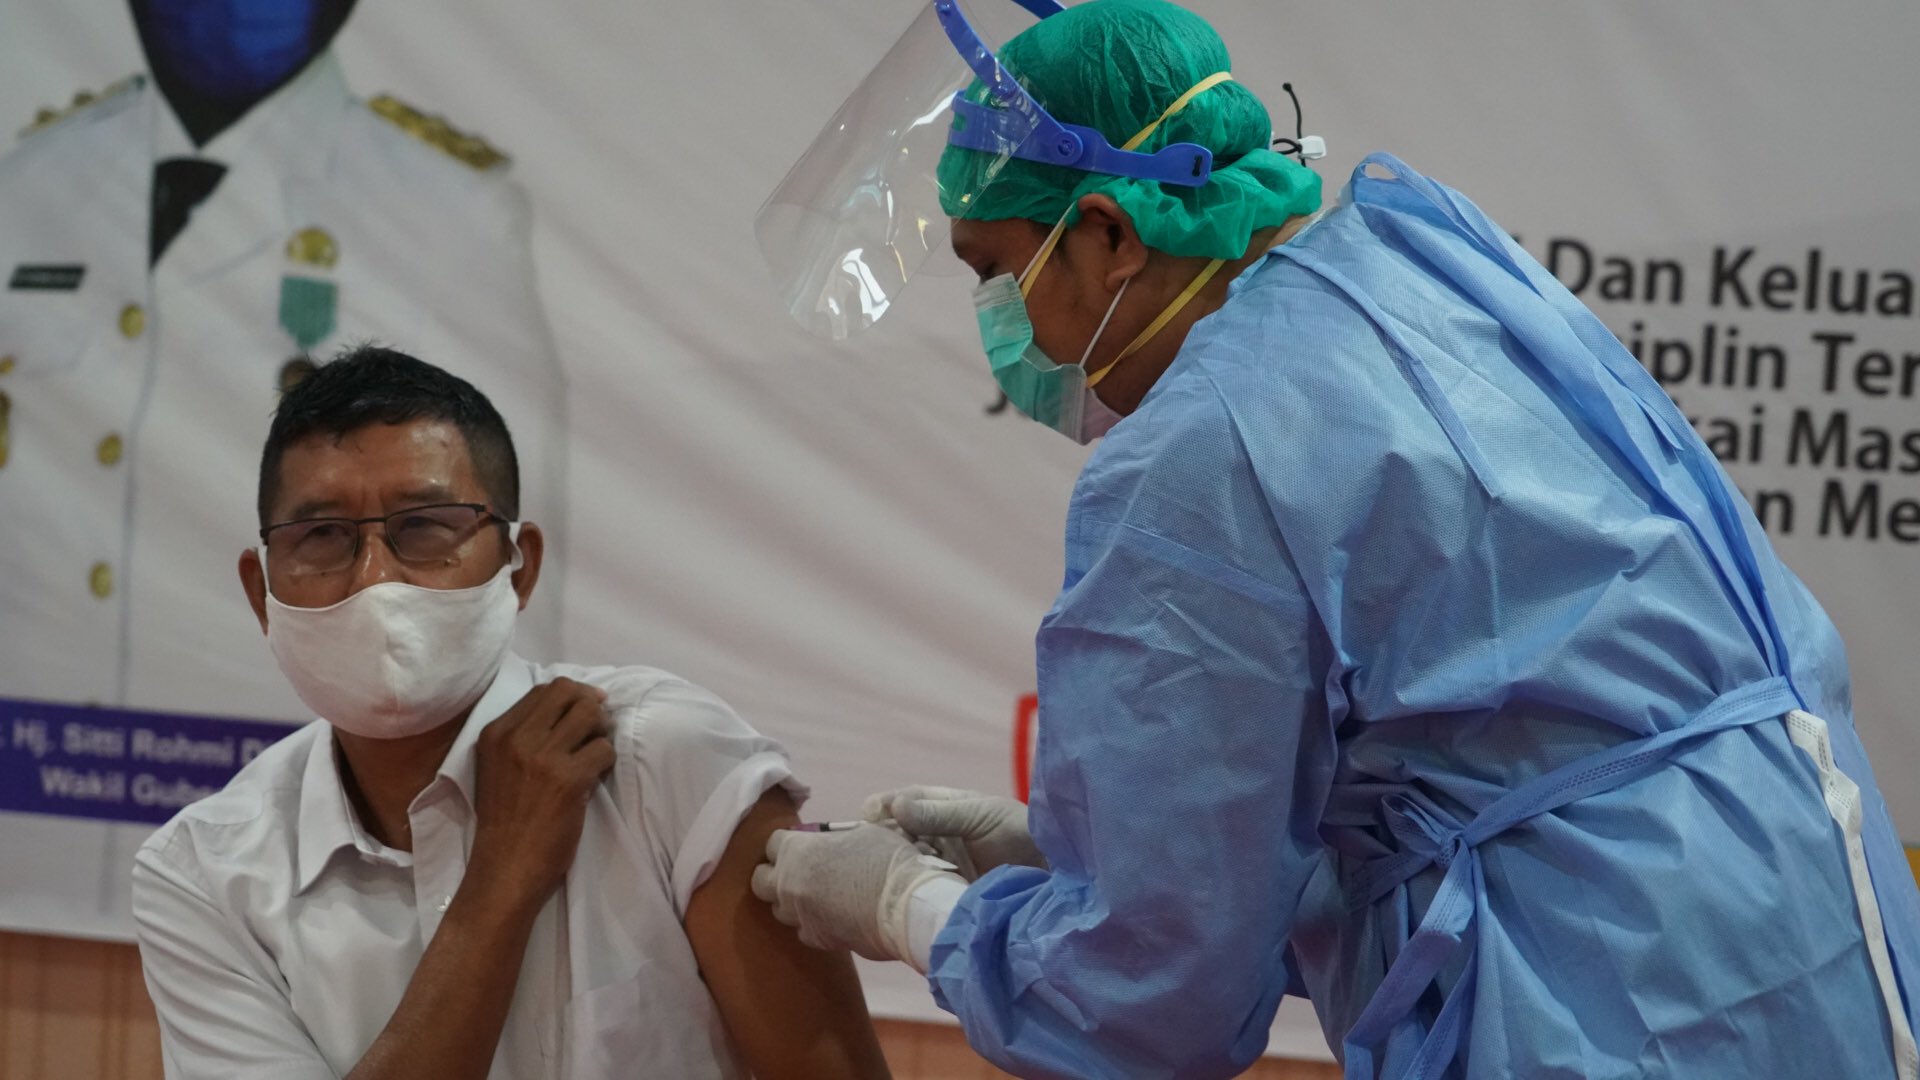 The Bali provincial government said it is aiming to vaccinate 70 percent of the island’s approximately 4.6 million population by the end of June. Photo: Indonesian Health Ministry